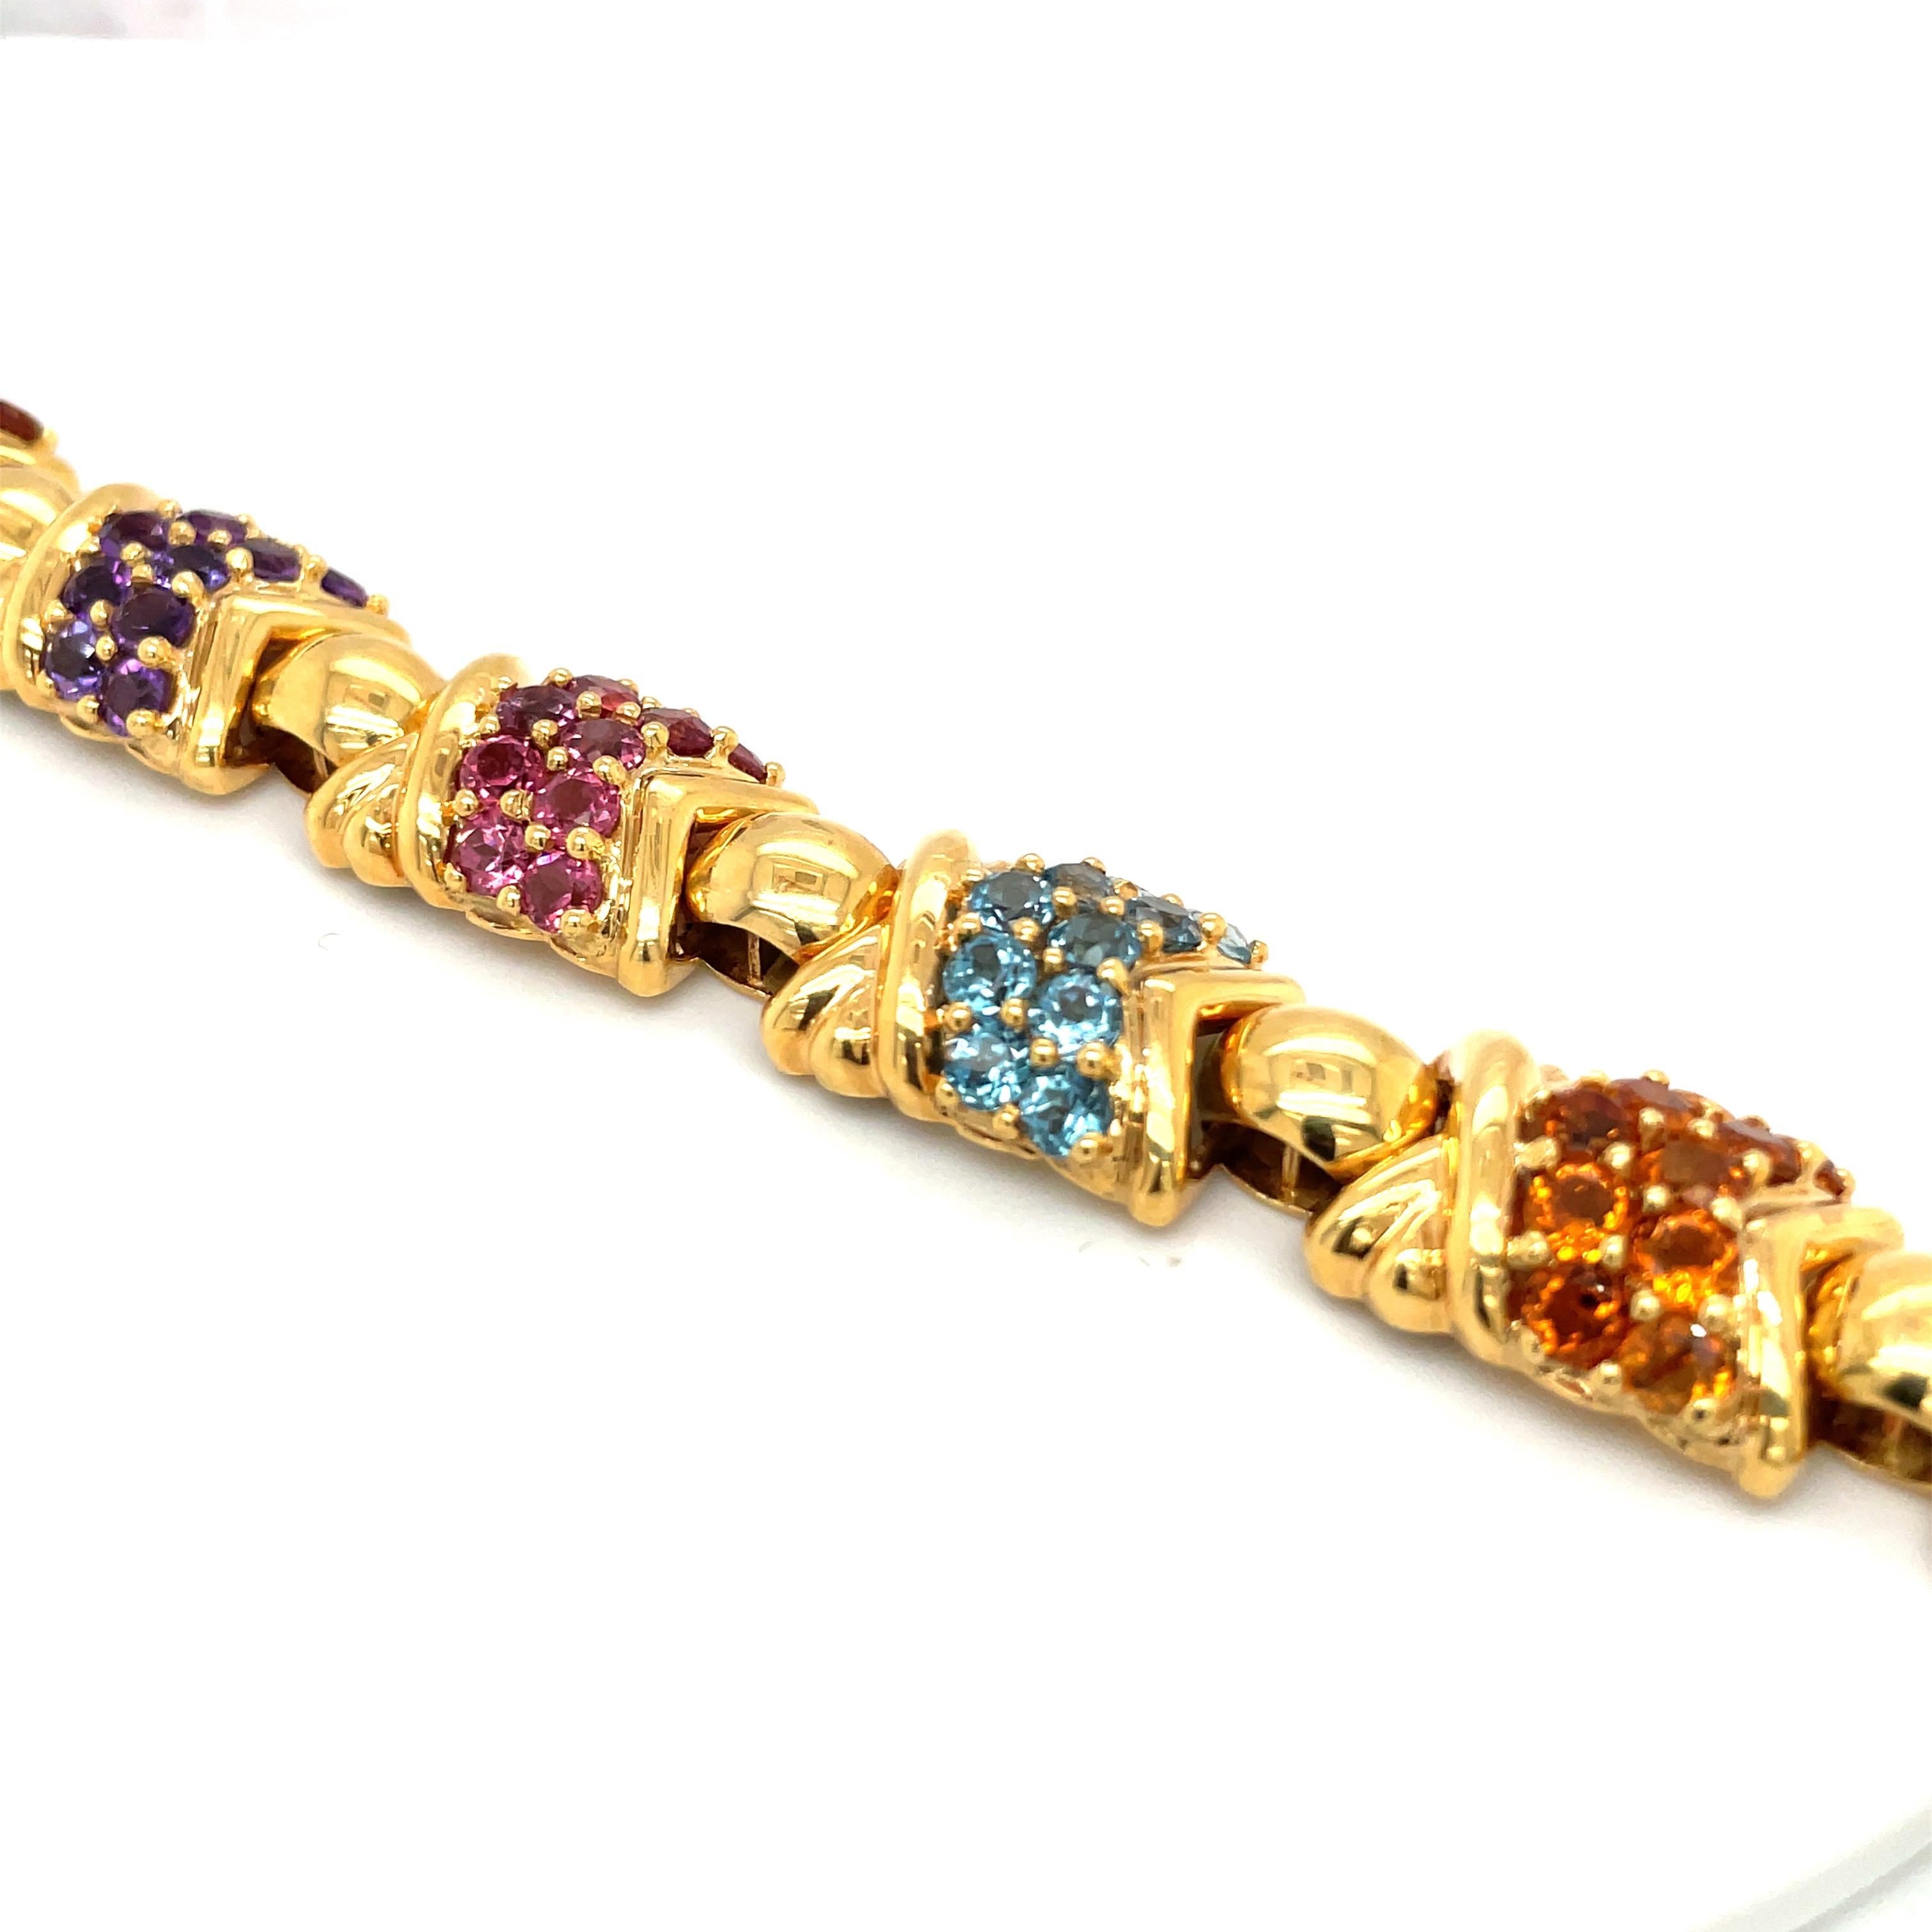 18KT Yellow Gold and Semi-Precious Gem Link Bracelet with 